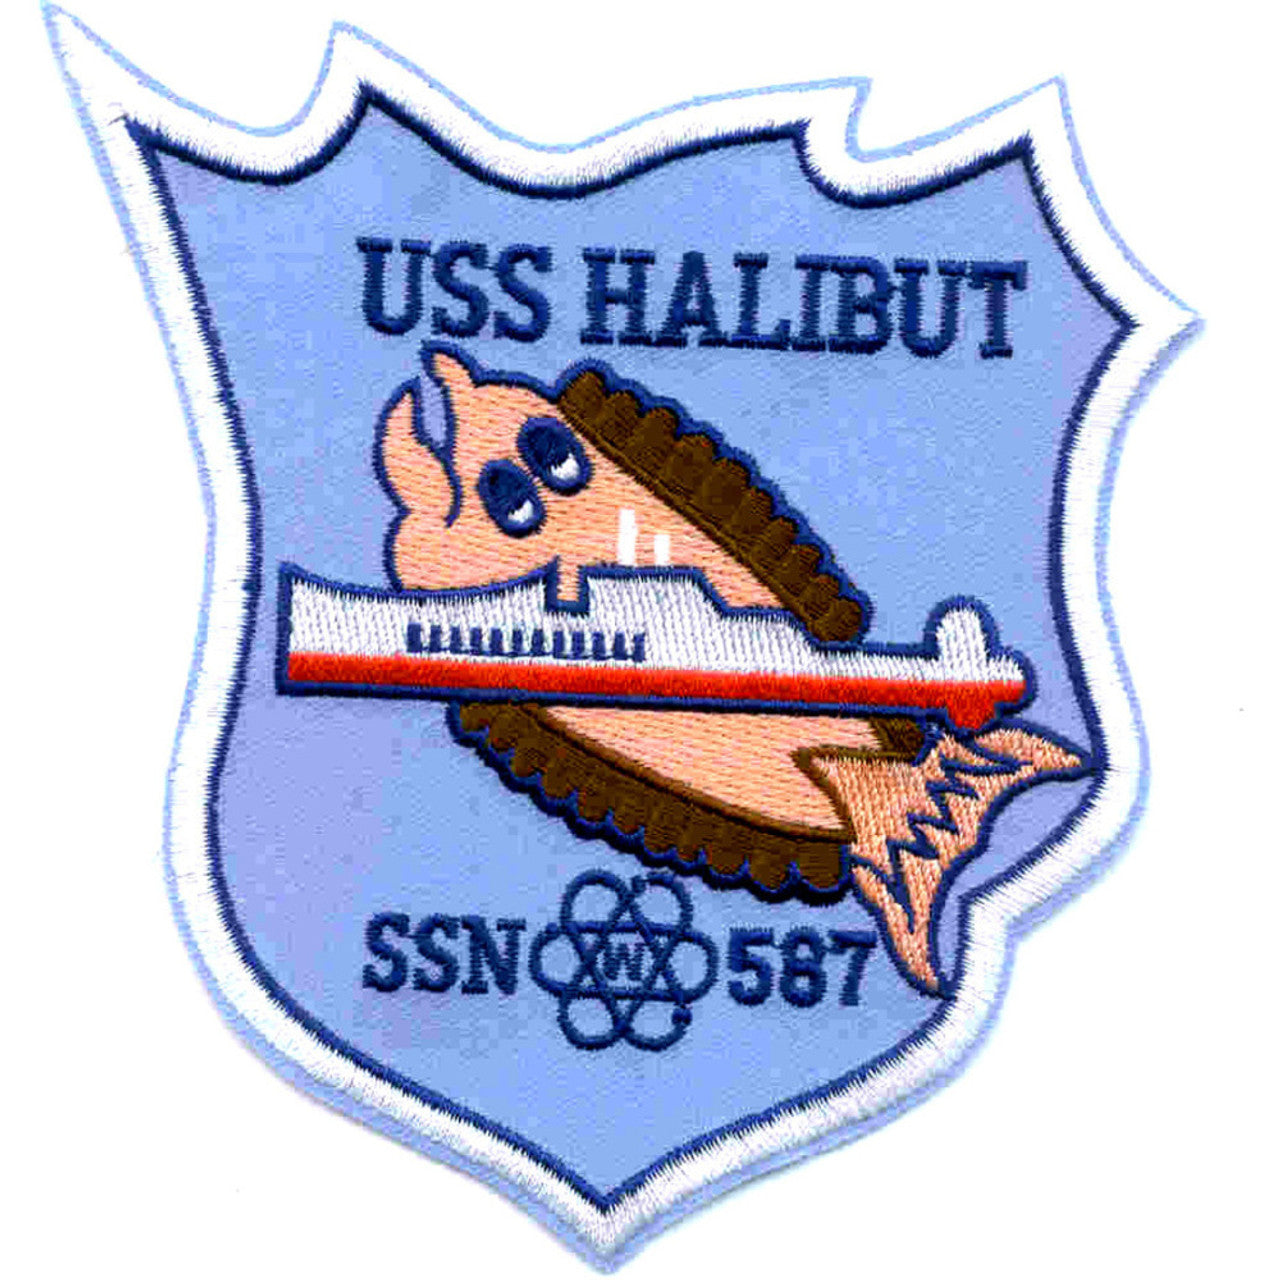 USS HALIBUT SSN 587 PATCH